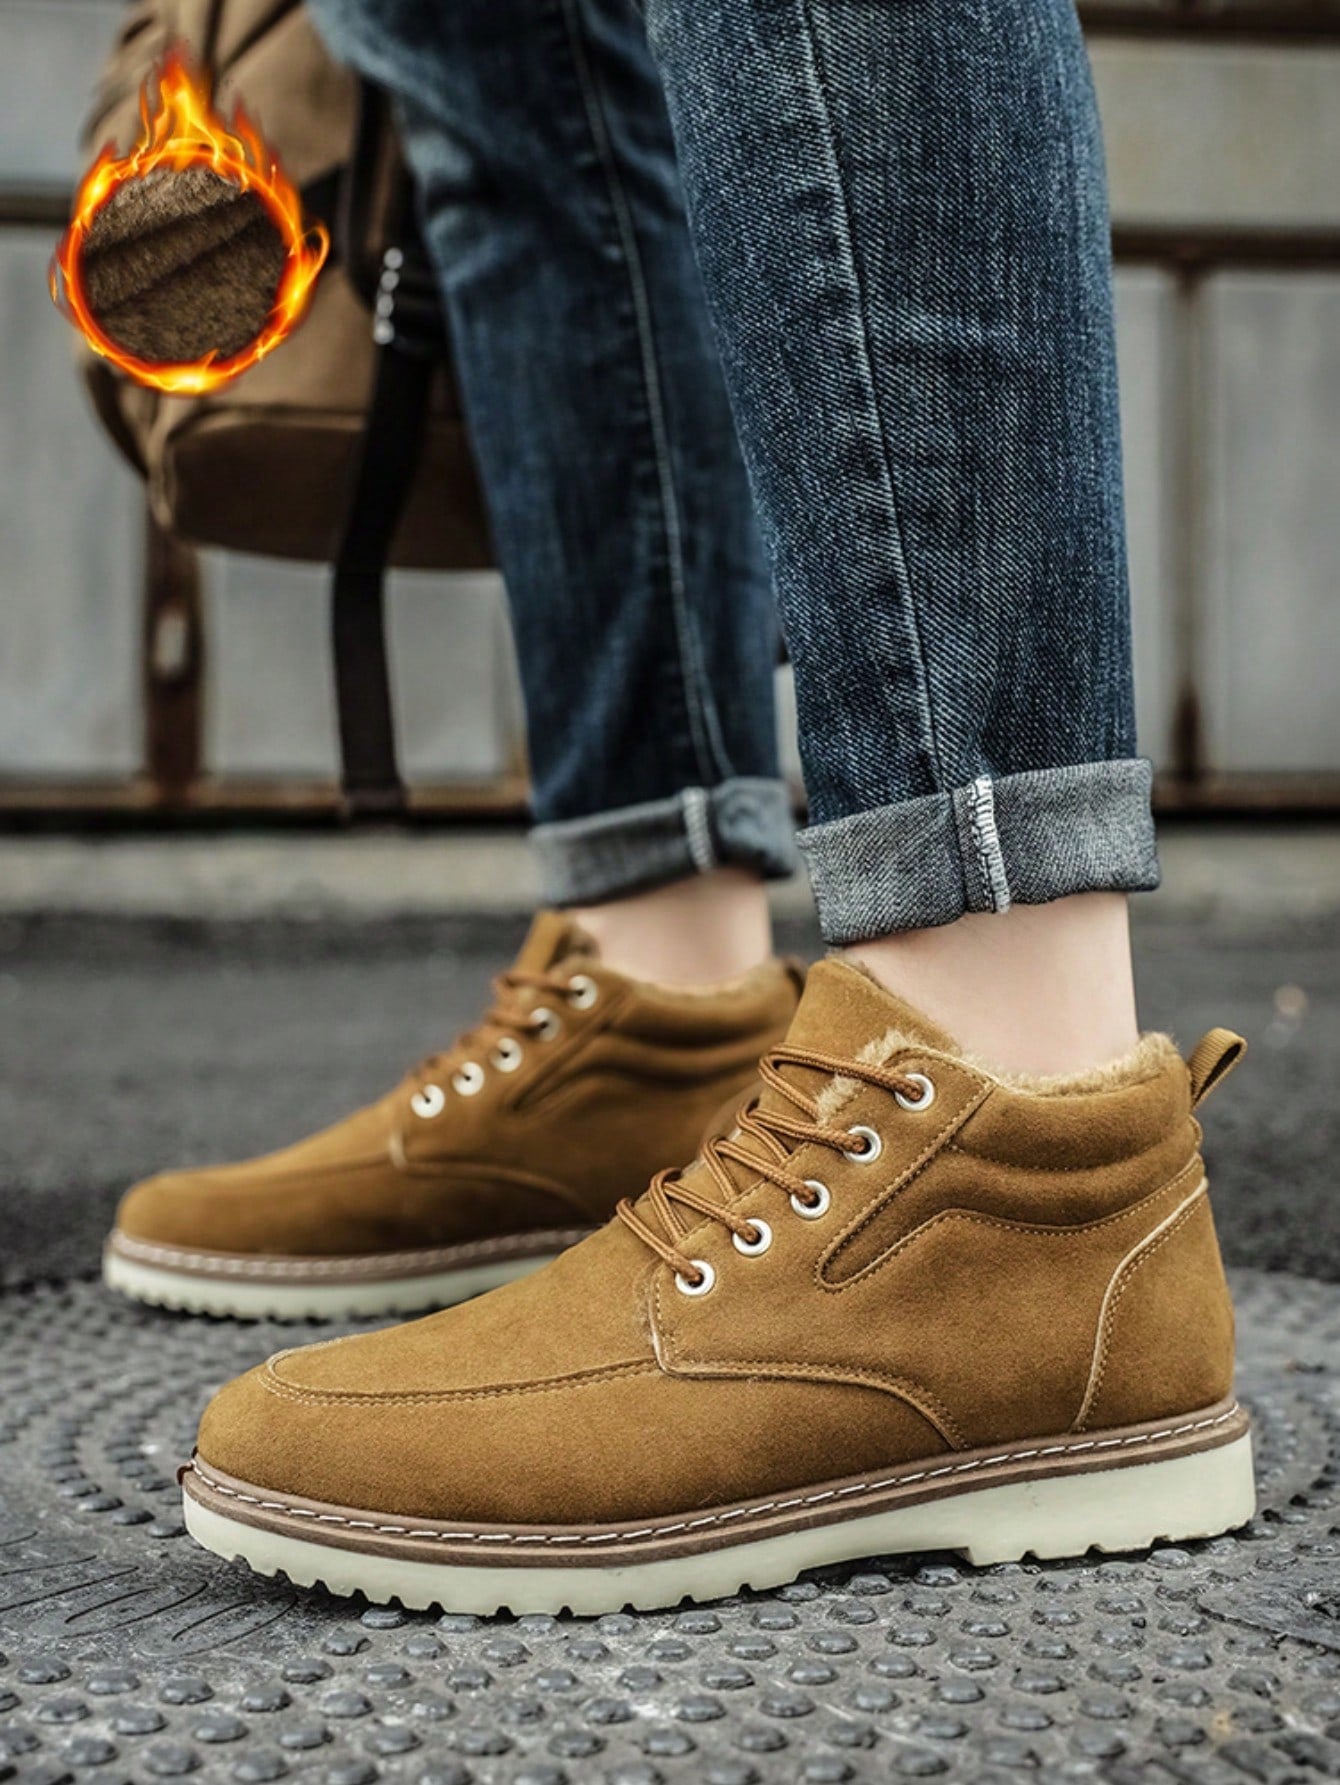 Men's Casual Pu Leather Athletic Shoes, Thick Sole Work Boot With Fleece Lining, Mid Top, Wear-resistant, Retro Lace-up Shoes For Winter